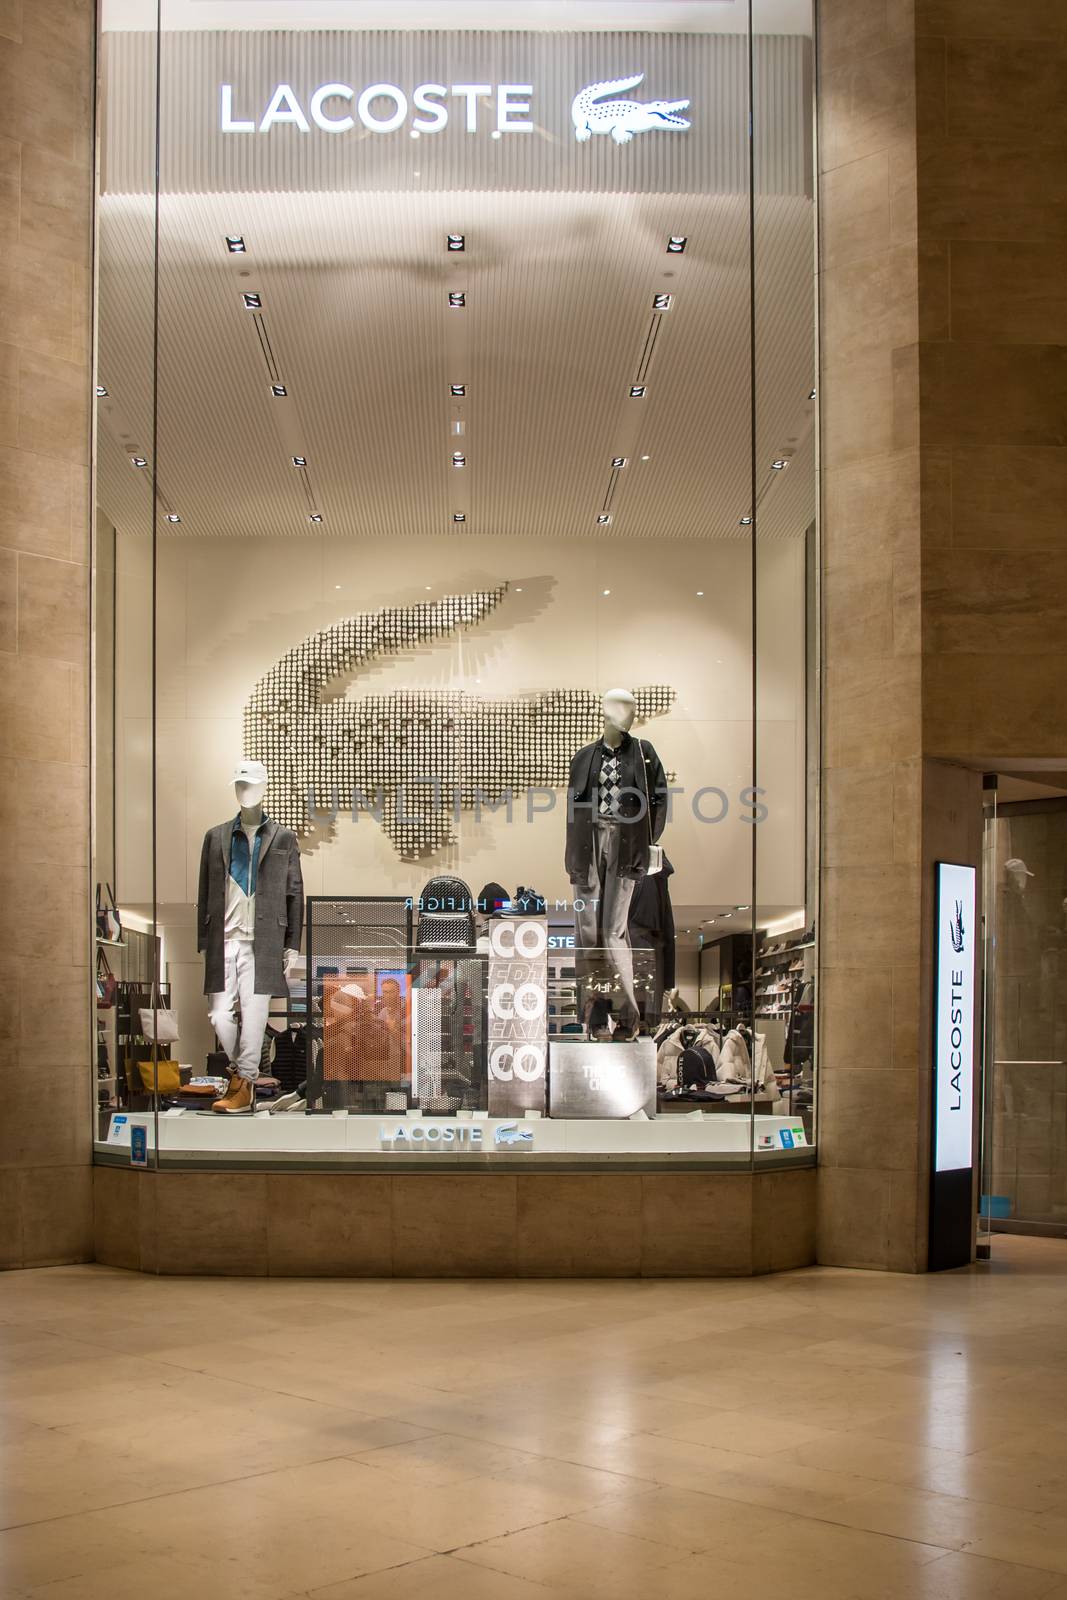 Lacoste Store facade in Paris, France, famous french Luxury clothe brand in Le Louvre Mall